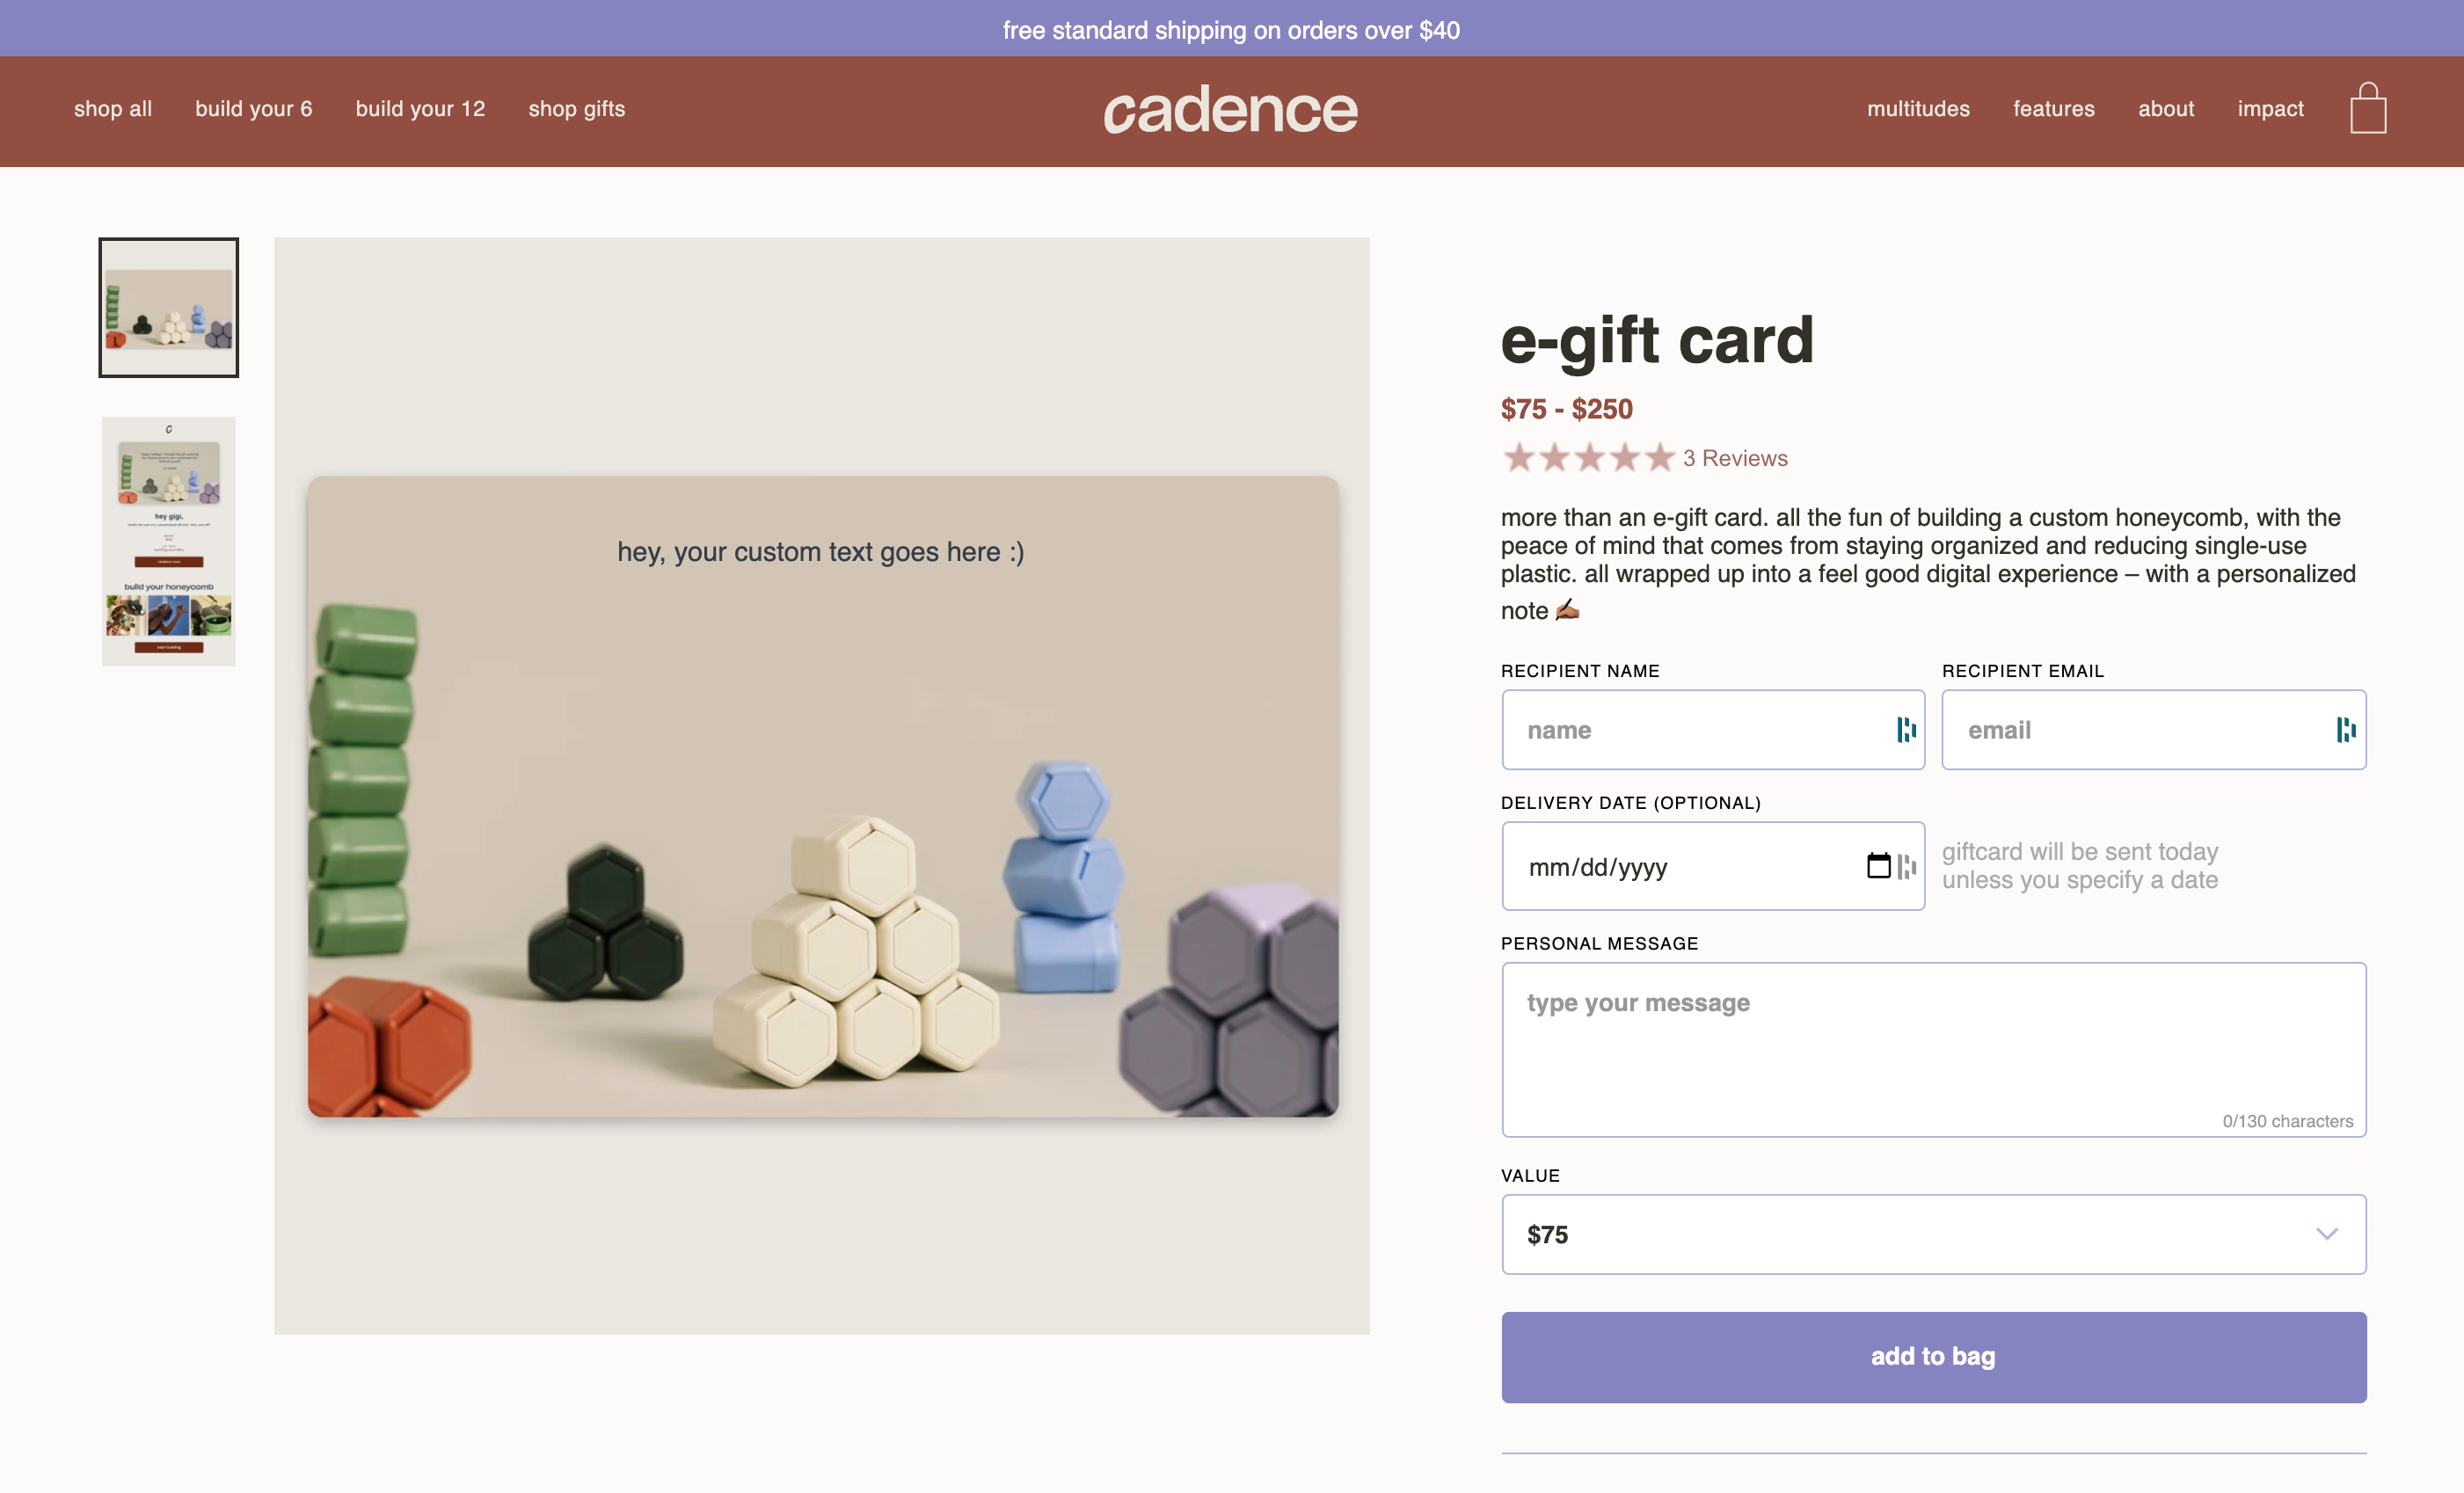 screencapture-keepyourcadence-products-e-gift-card-2022-01-09-15_57_55-edit